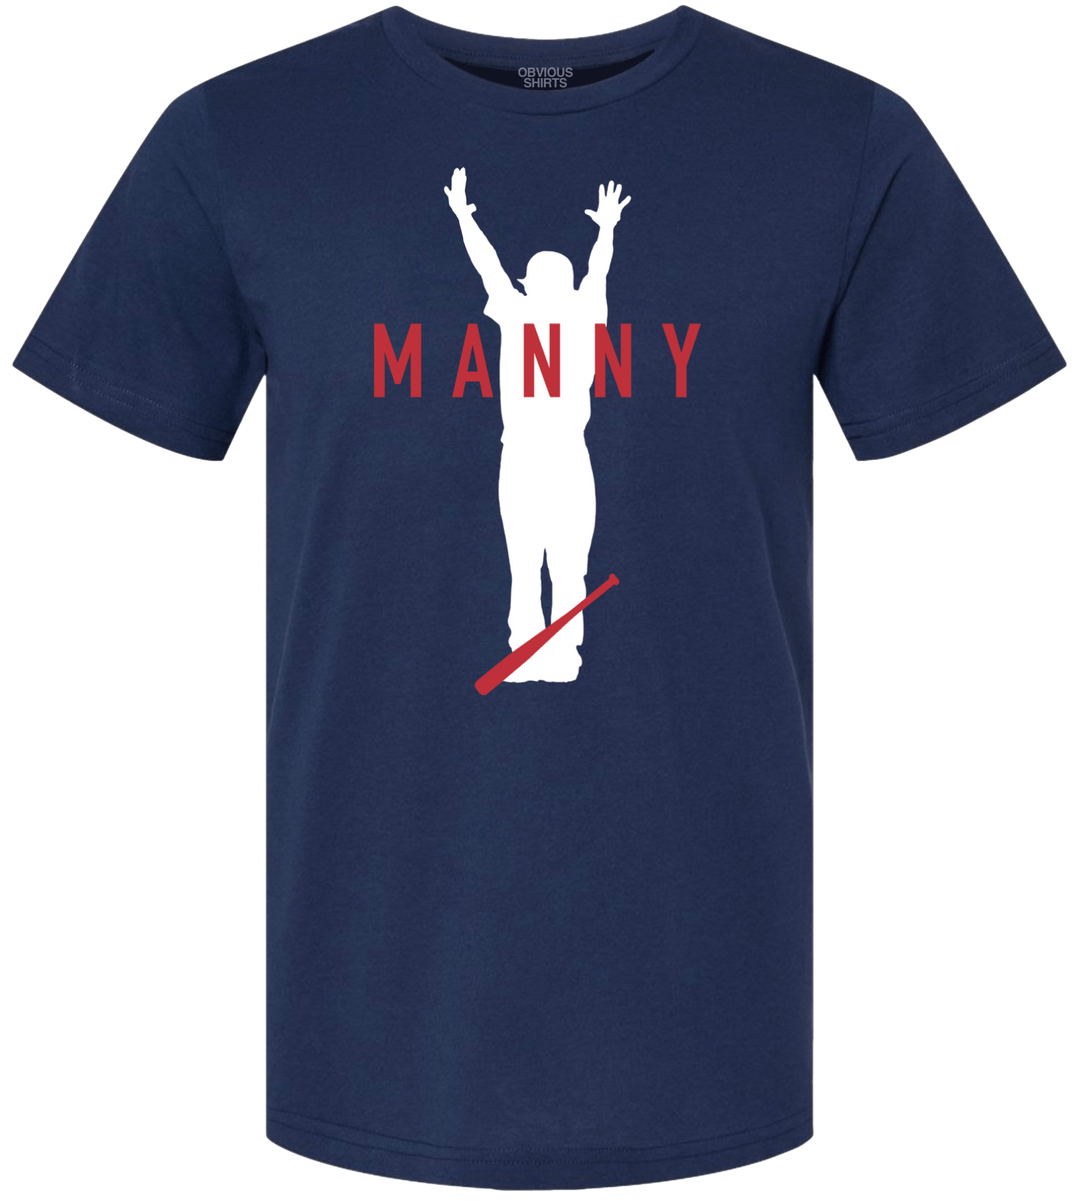 MANNY. - OBVIOUS SHIRTS